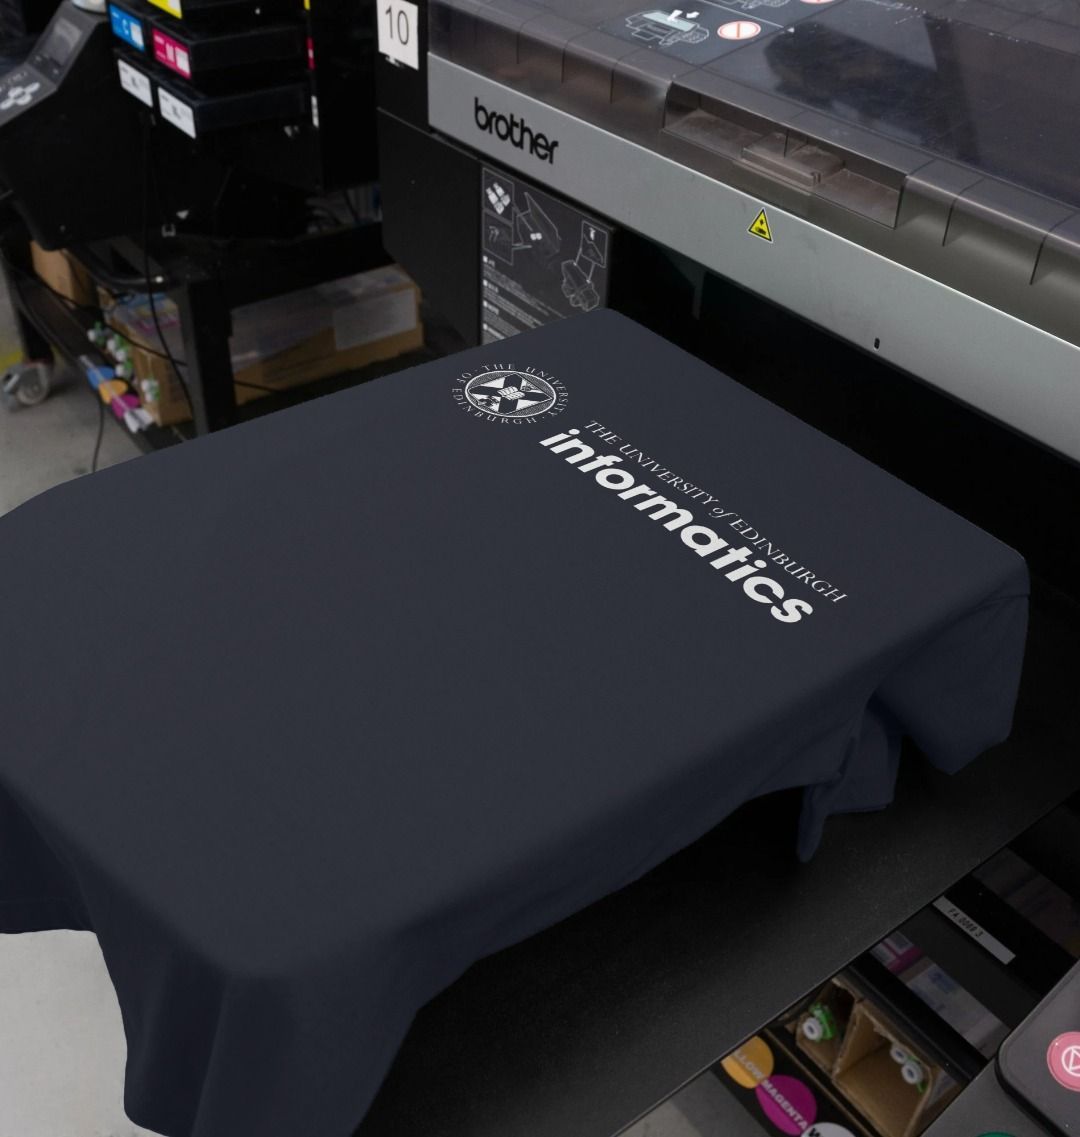 Our School of Informatics T Shirt being printed by our print on demand partner, teemill.